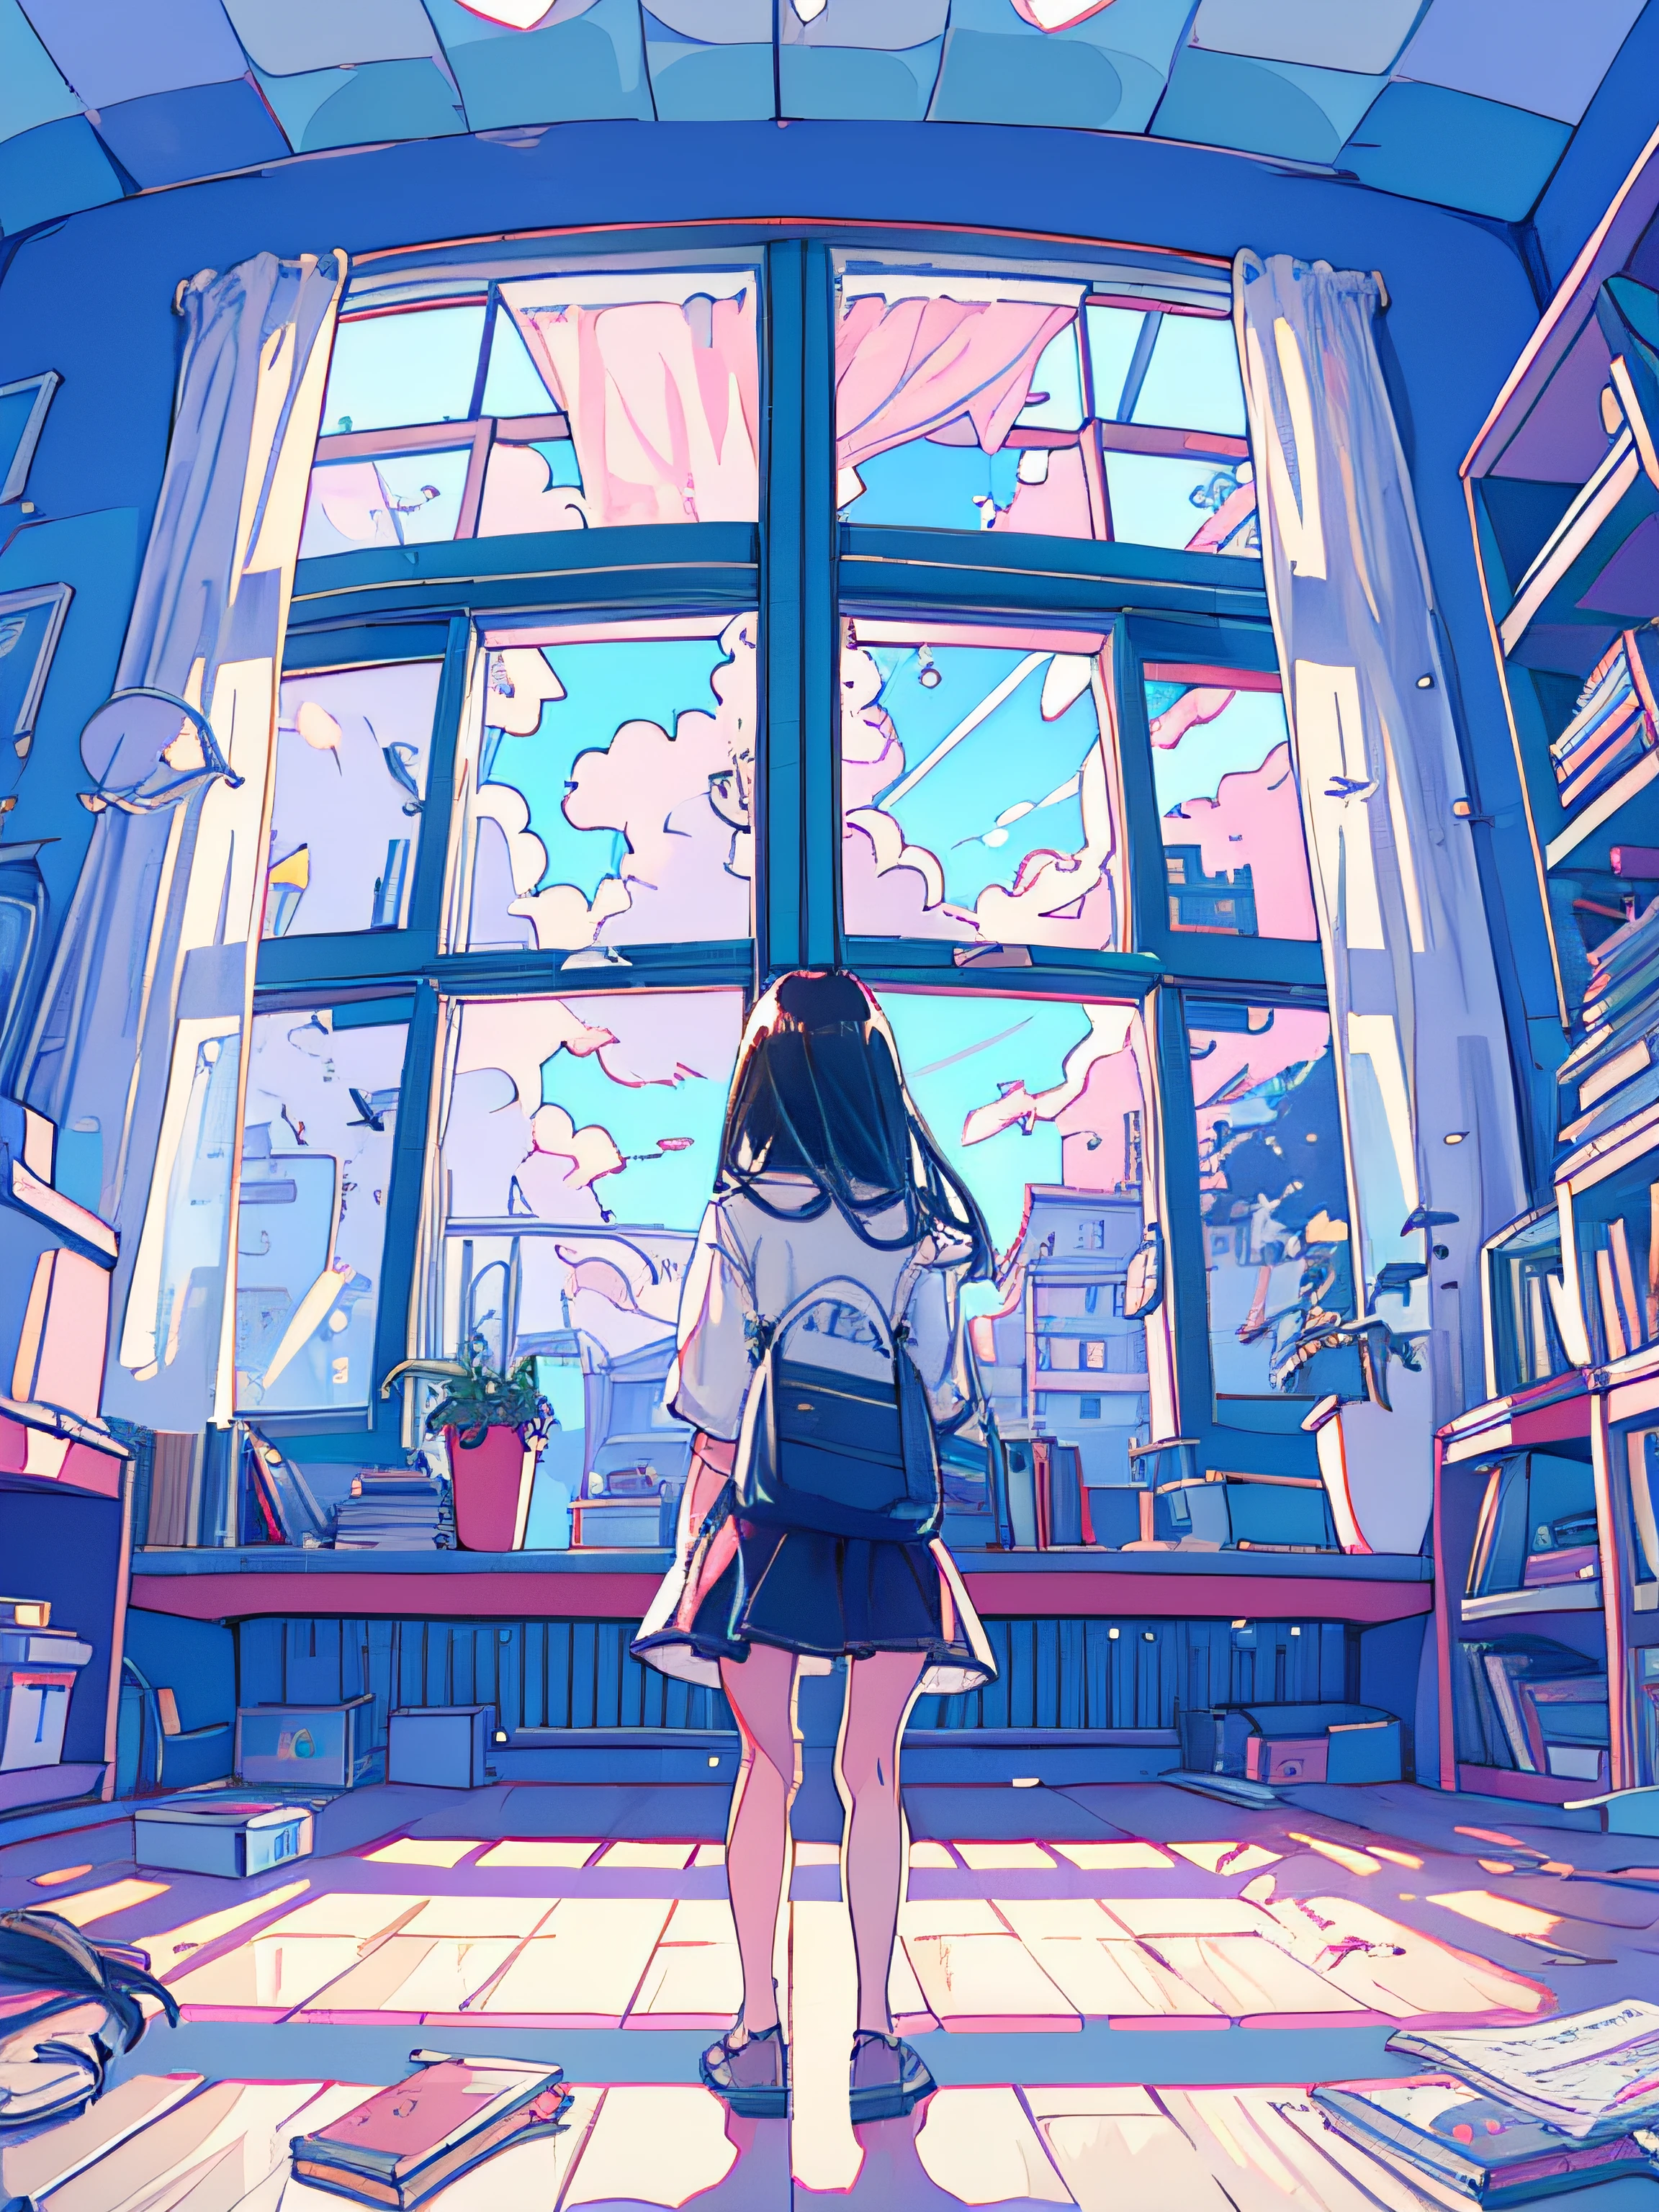 (1girl in), 20yr old, Detailed details, A dark-haired, length hair, (White underwear), White shirt, In front of a large window, (Stand facing the window), plays the guitar, posterior view, inside in room, Hardwood flooring, bookcase, houseplant, Big clouds outside the window, portlate,